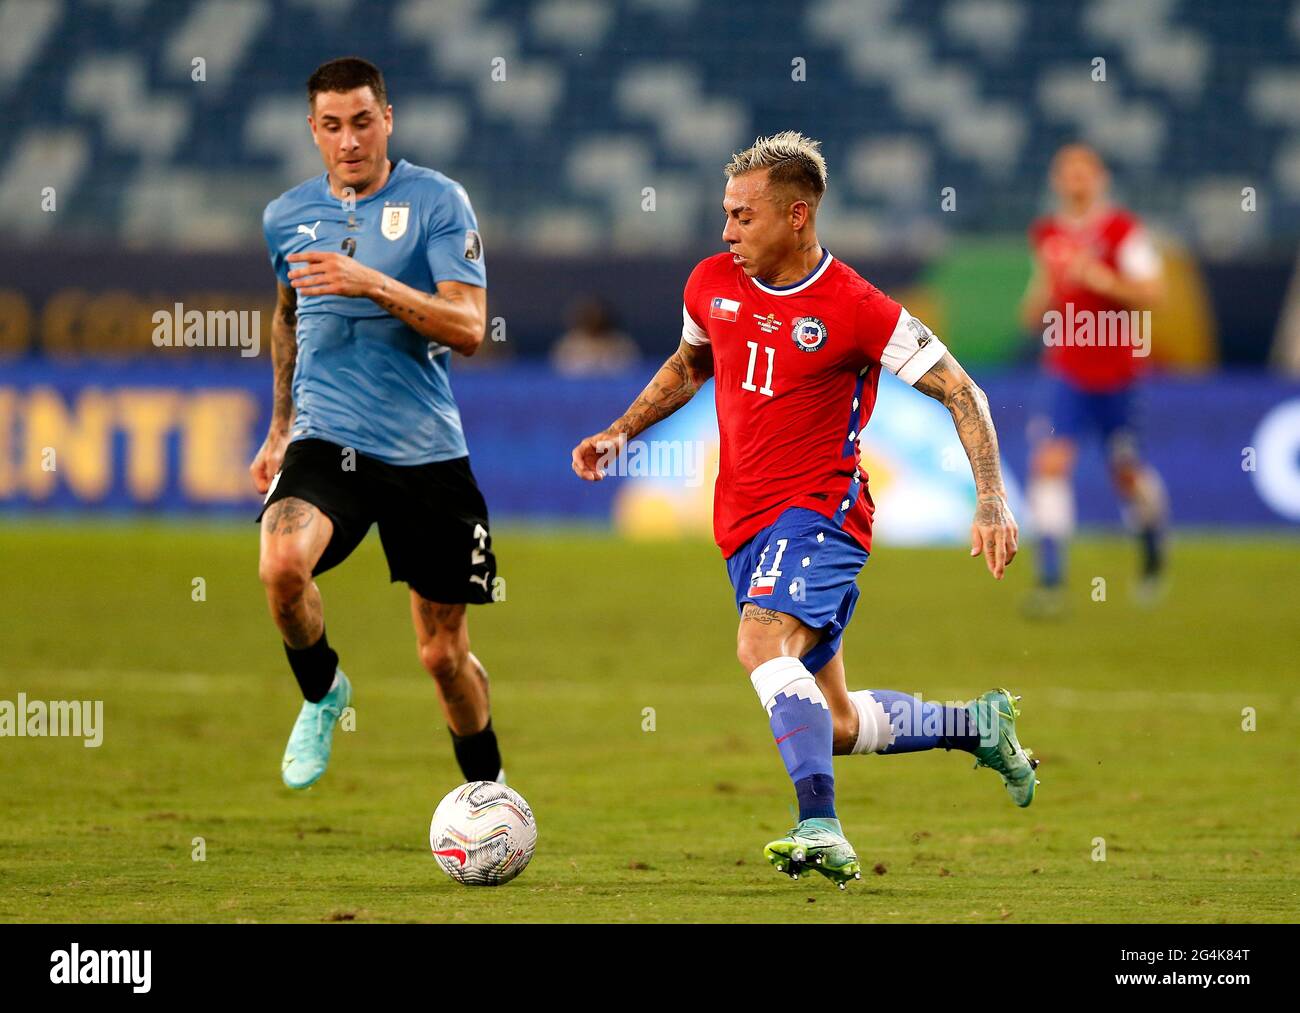 CUIABA, BRAZIL - JUNE 21: Eduardo Vargas of Chile competes for the ball with Jose Gimenez of Uruguay ,during the match between Uruguay and Chile as part of Conmebol Copa America Brazil 2021 at Arena Pantanal on June 21, 2021 in Cuiaba, Brazil. (MB Media) Stock Photo